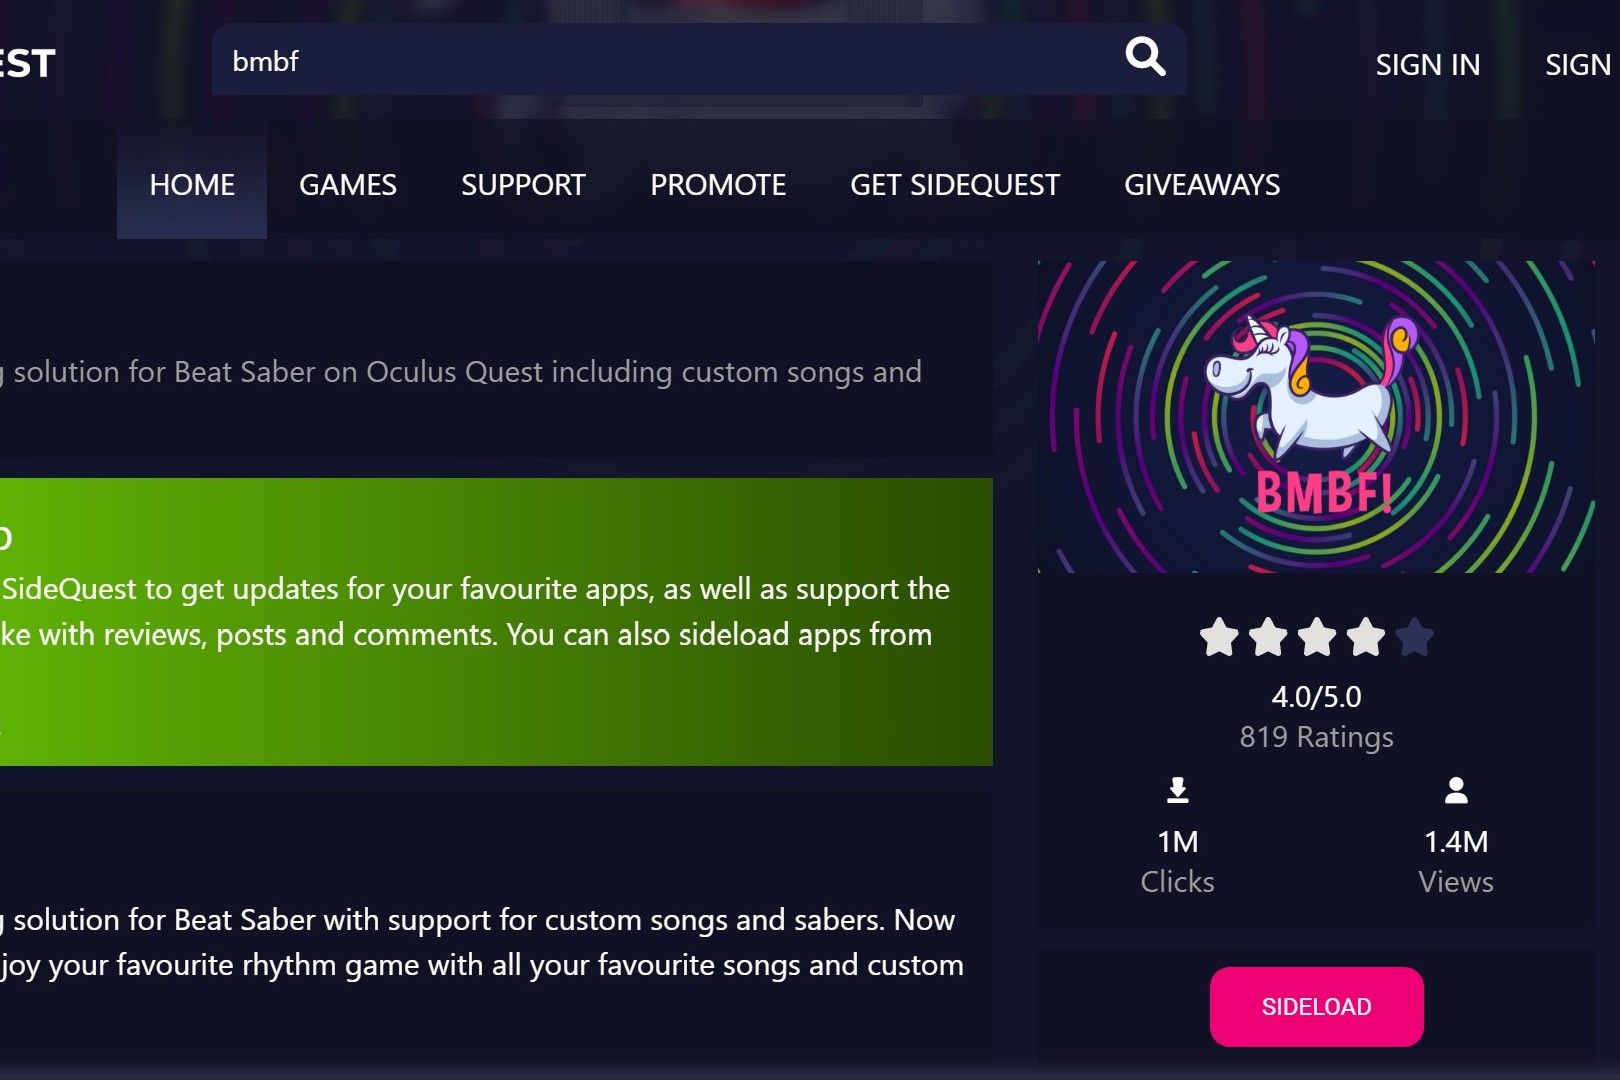 Download BMBF from Sidequest